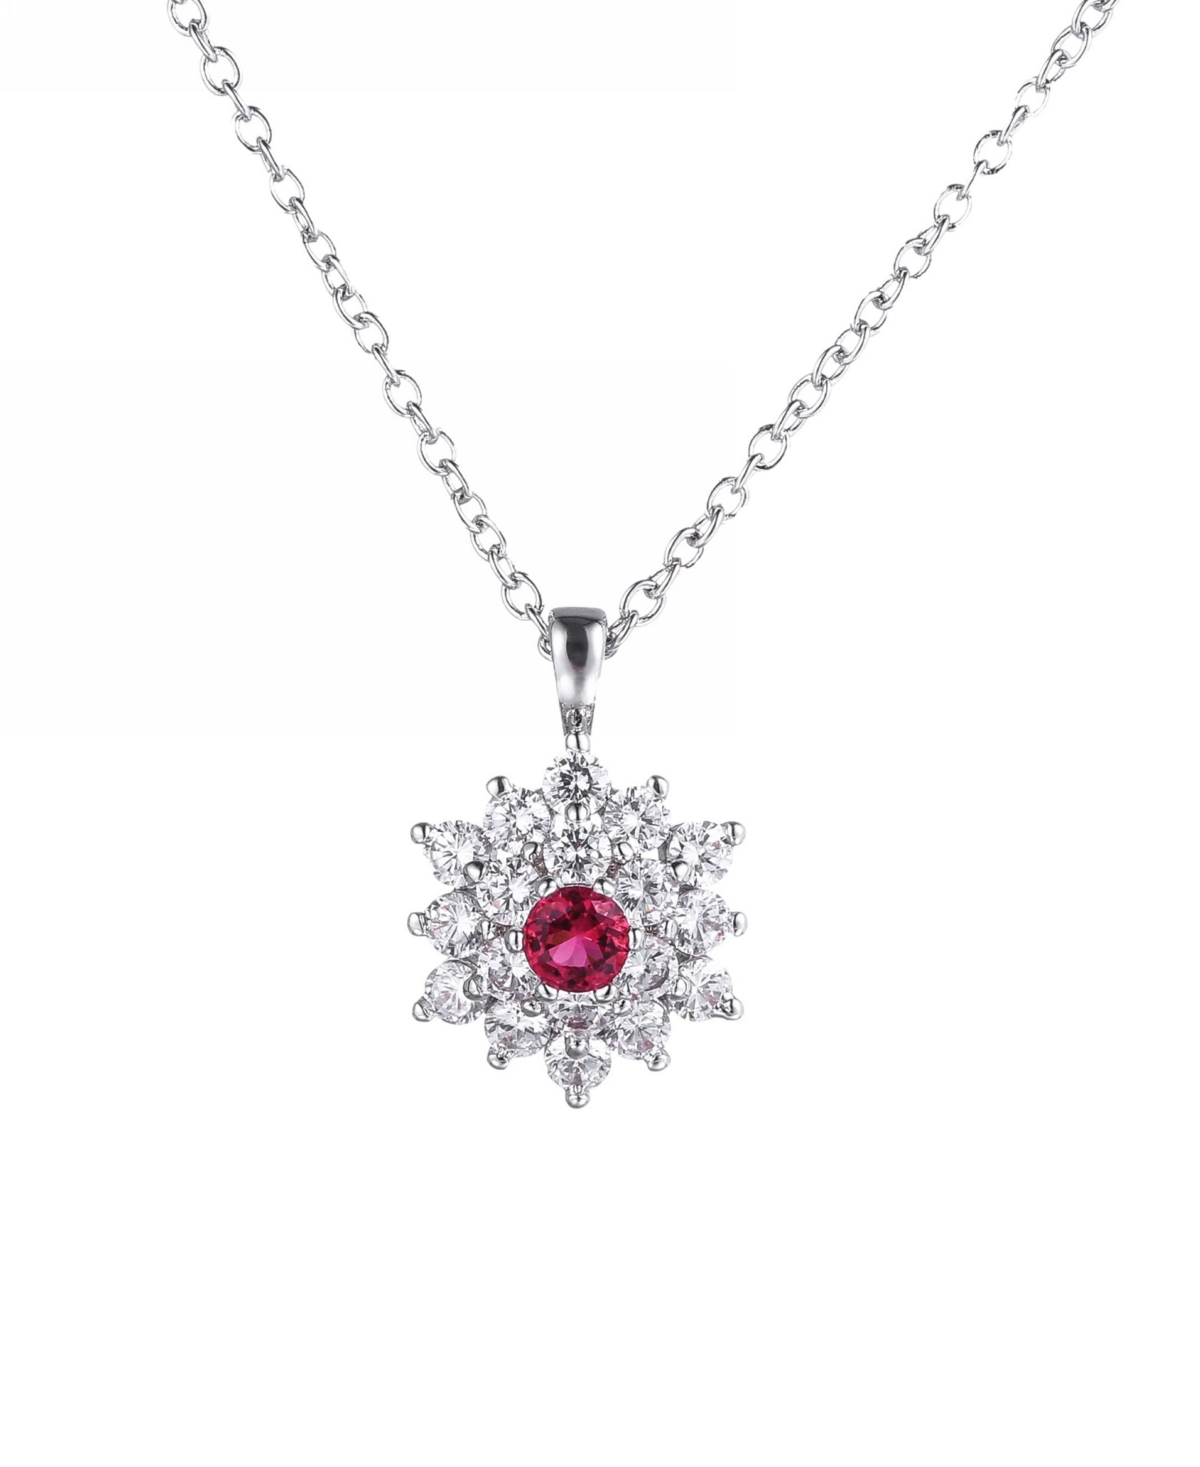 Silver-Tone Ruby Accent Flower Pendant Necklace - Silver-Tone